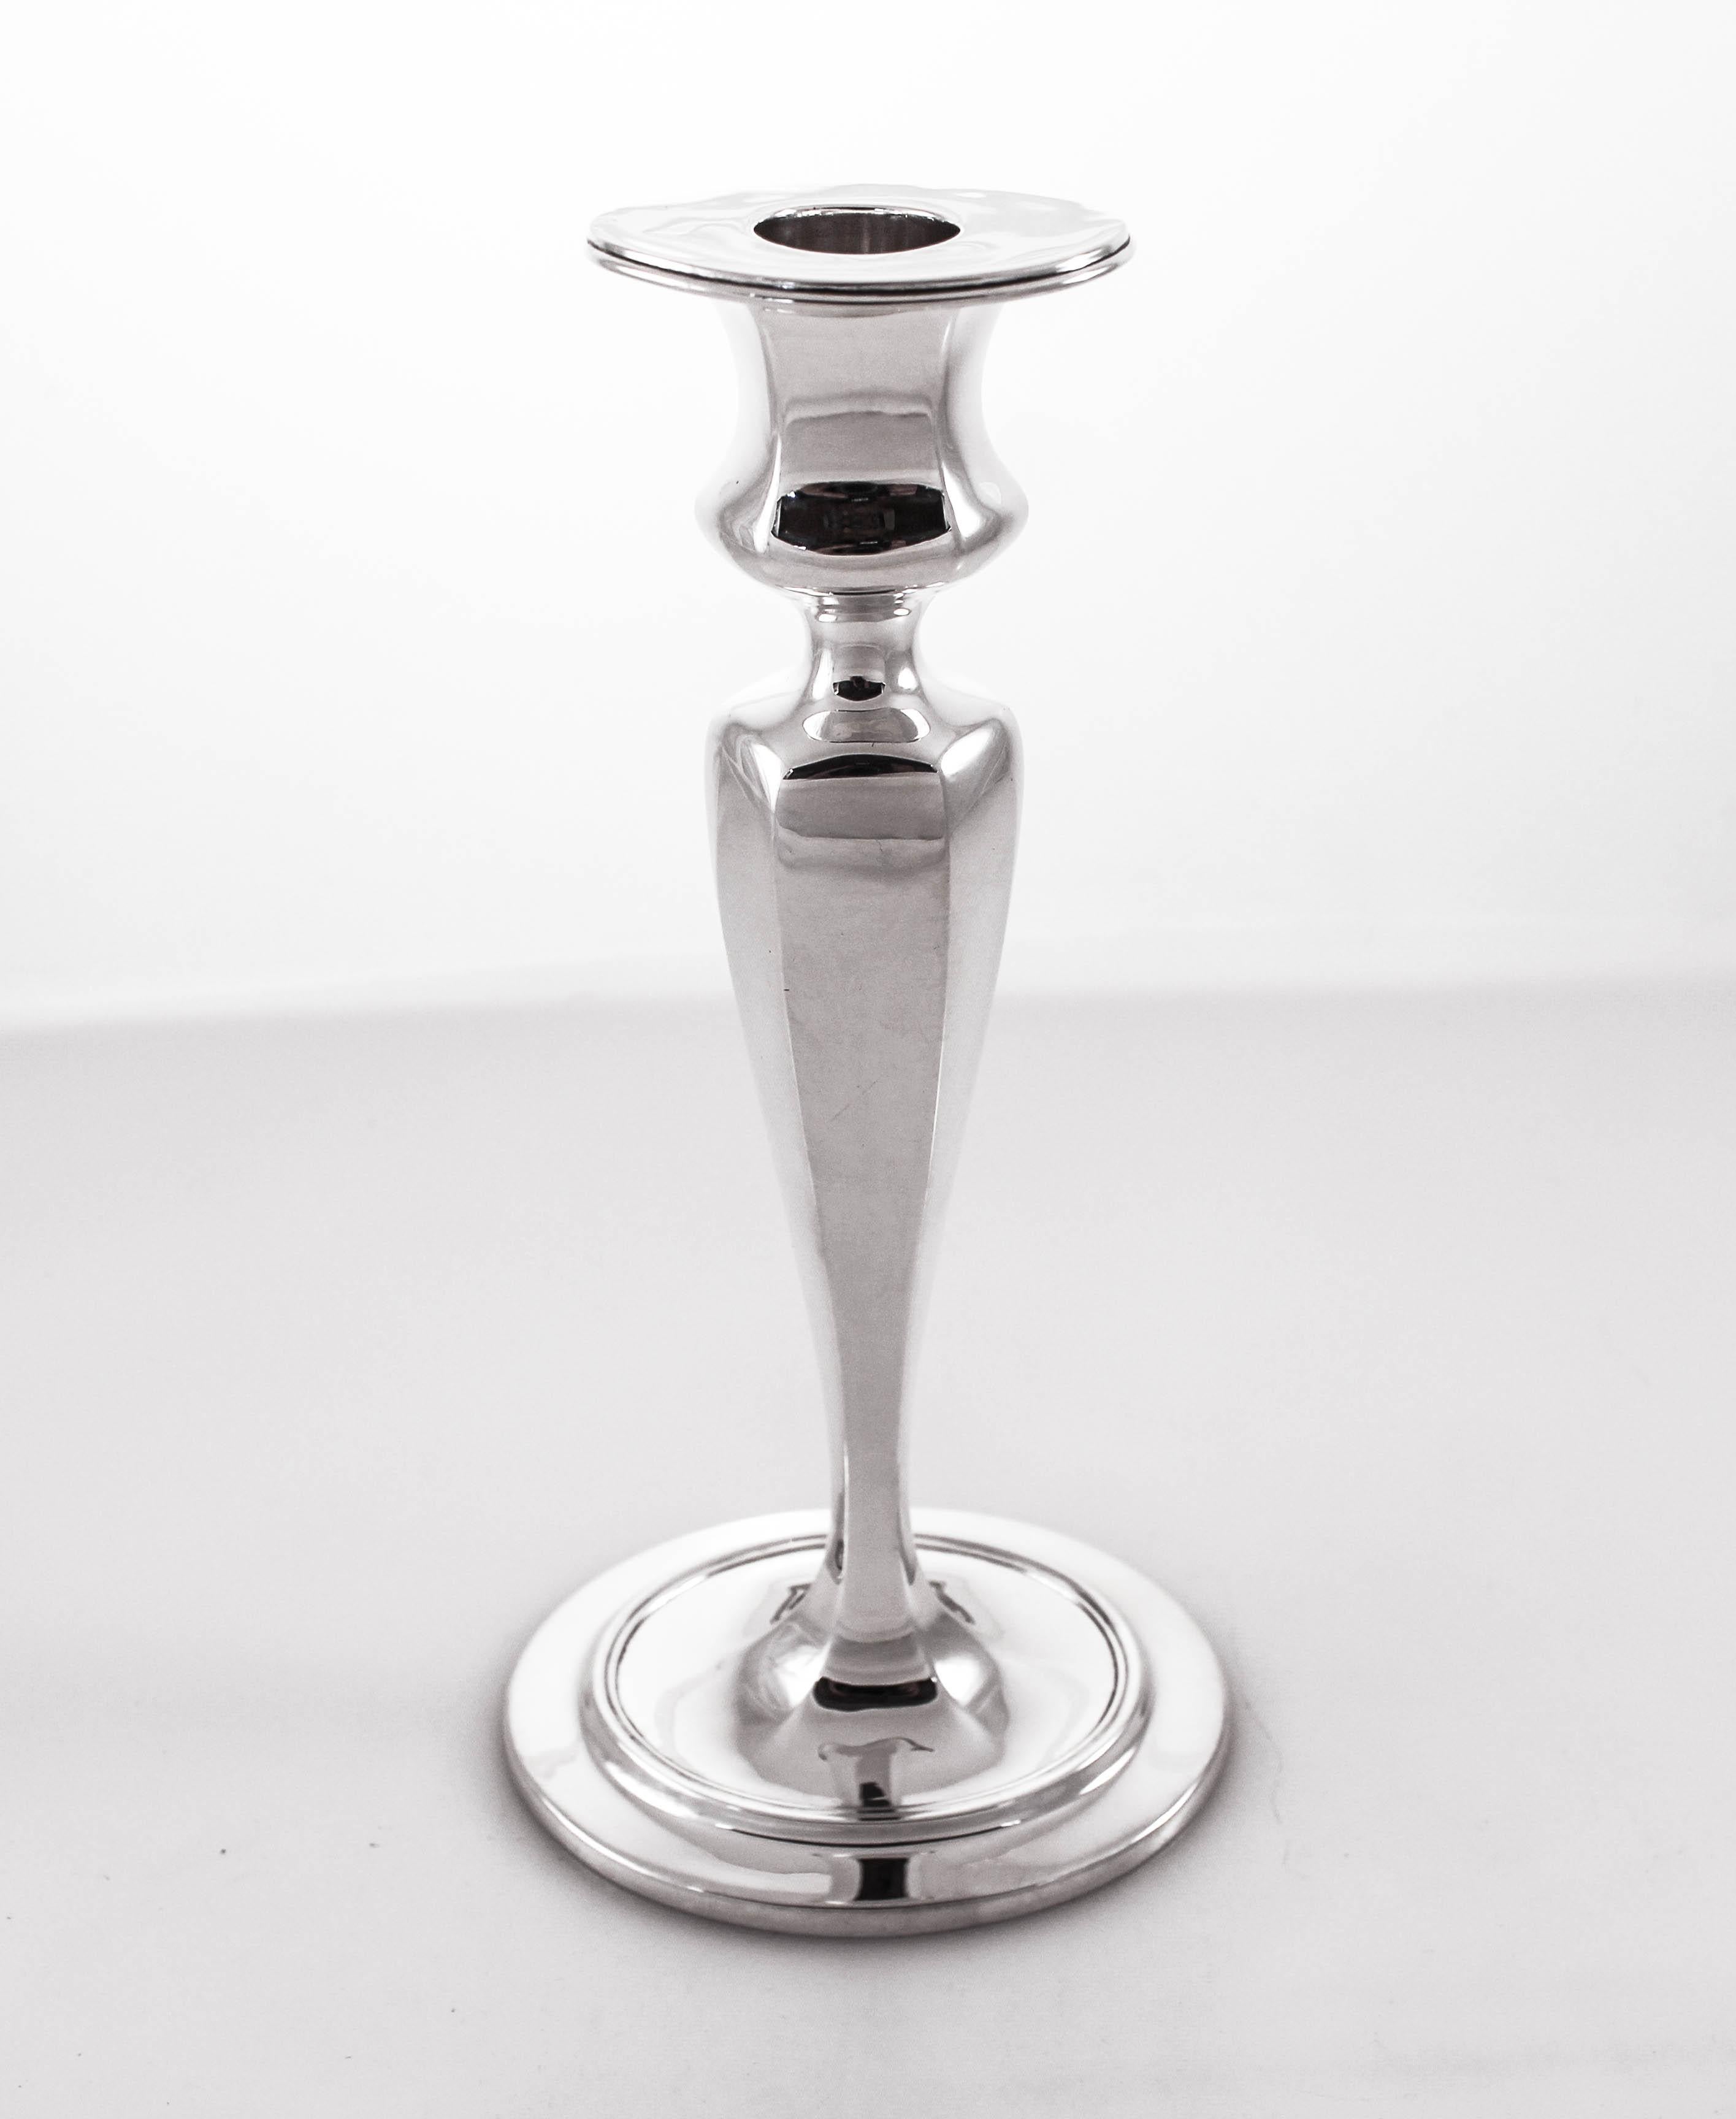 These handsome sterling silver candlesticks are by Tiffany and Company. They are modern and have a feminine silhouette with a tapered bottom. They work with any decor; modern or traditional, what’s there not to love?!